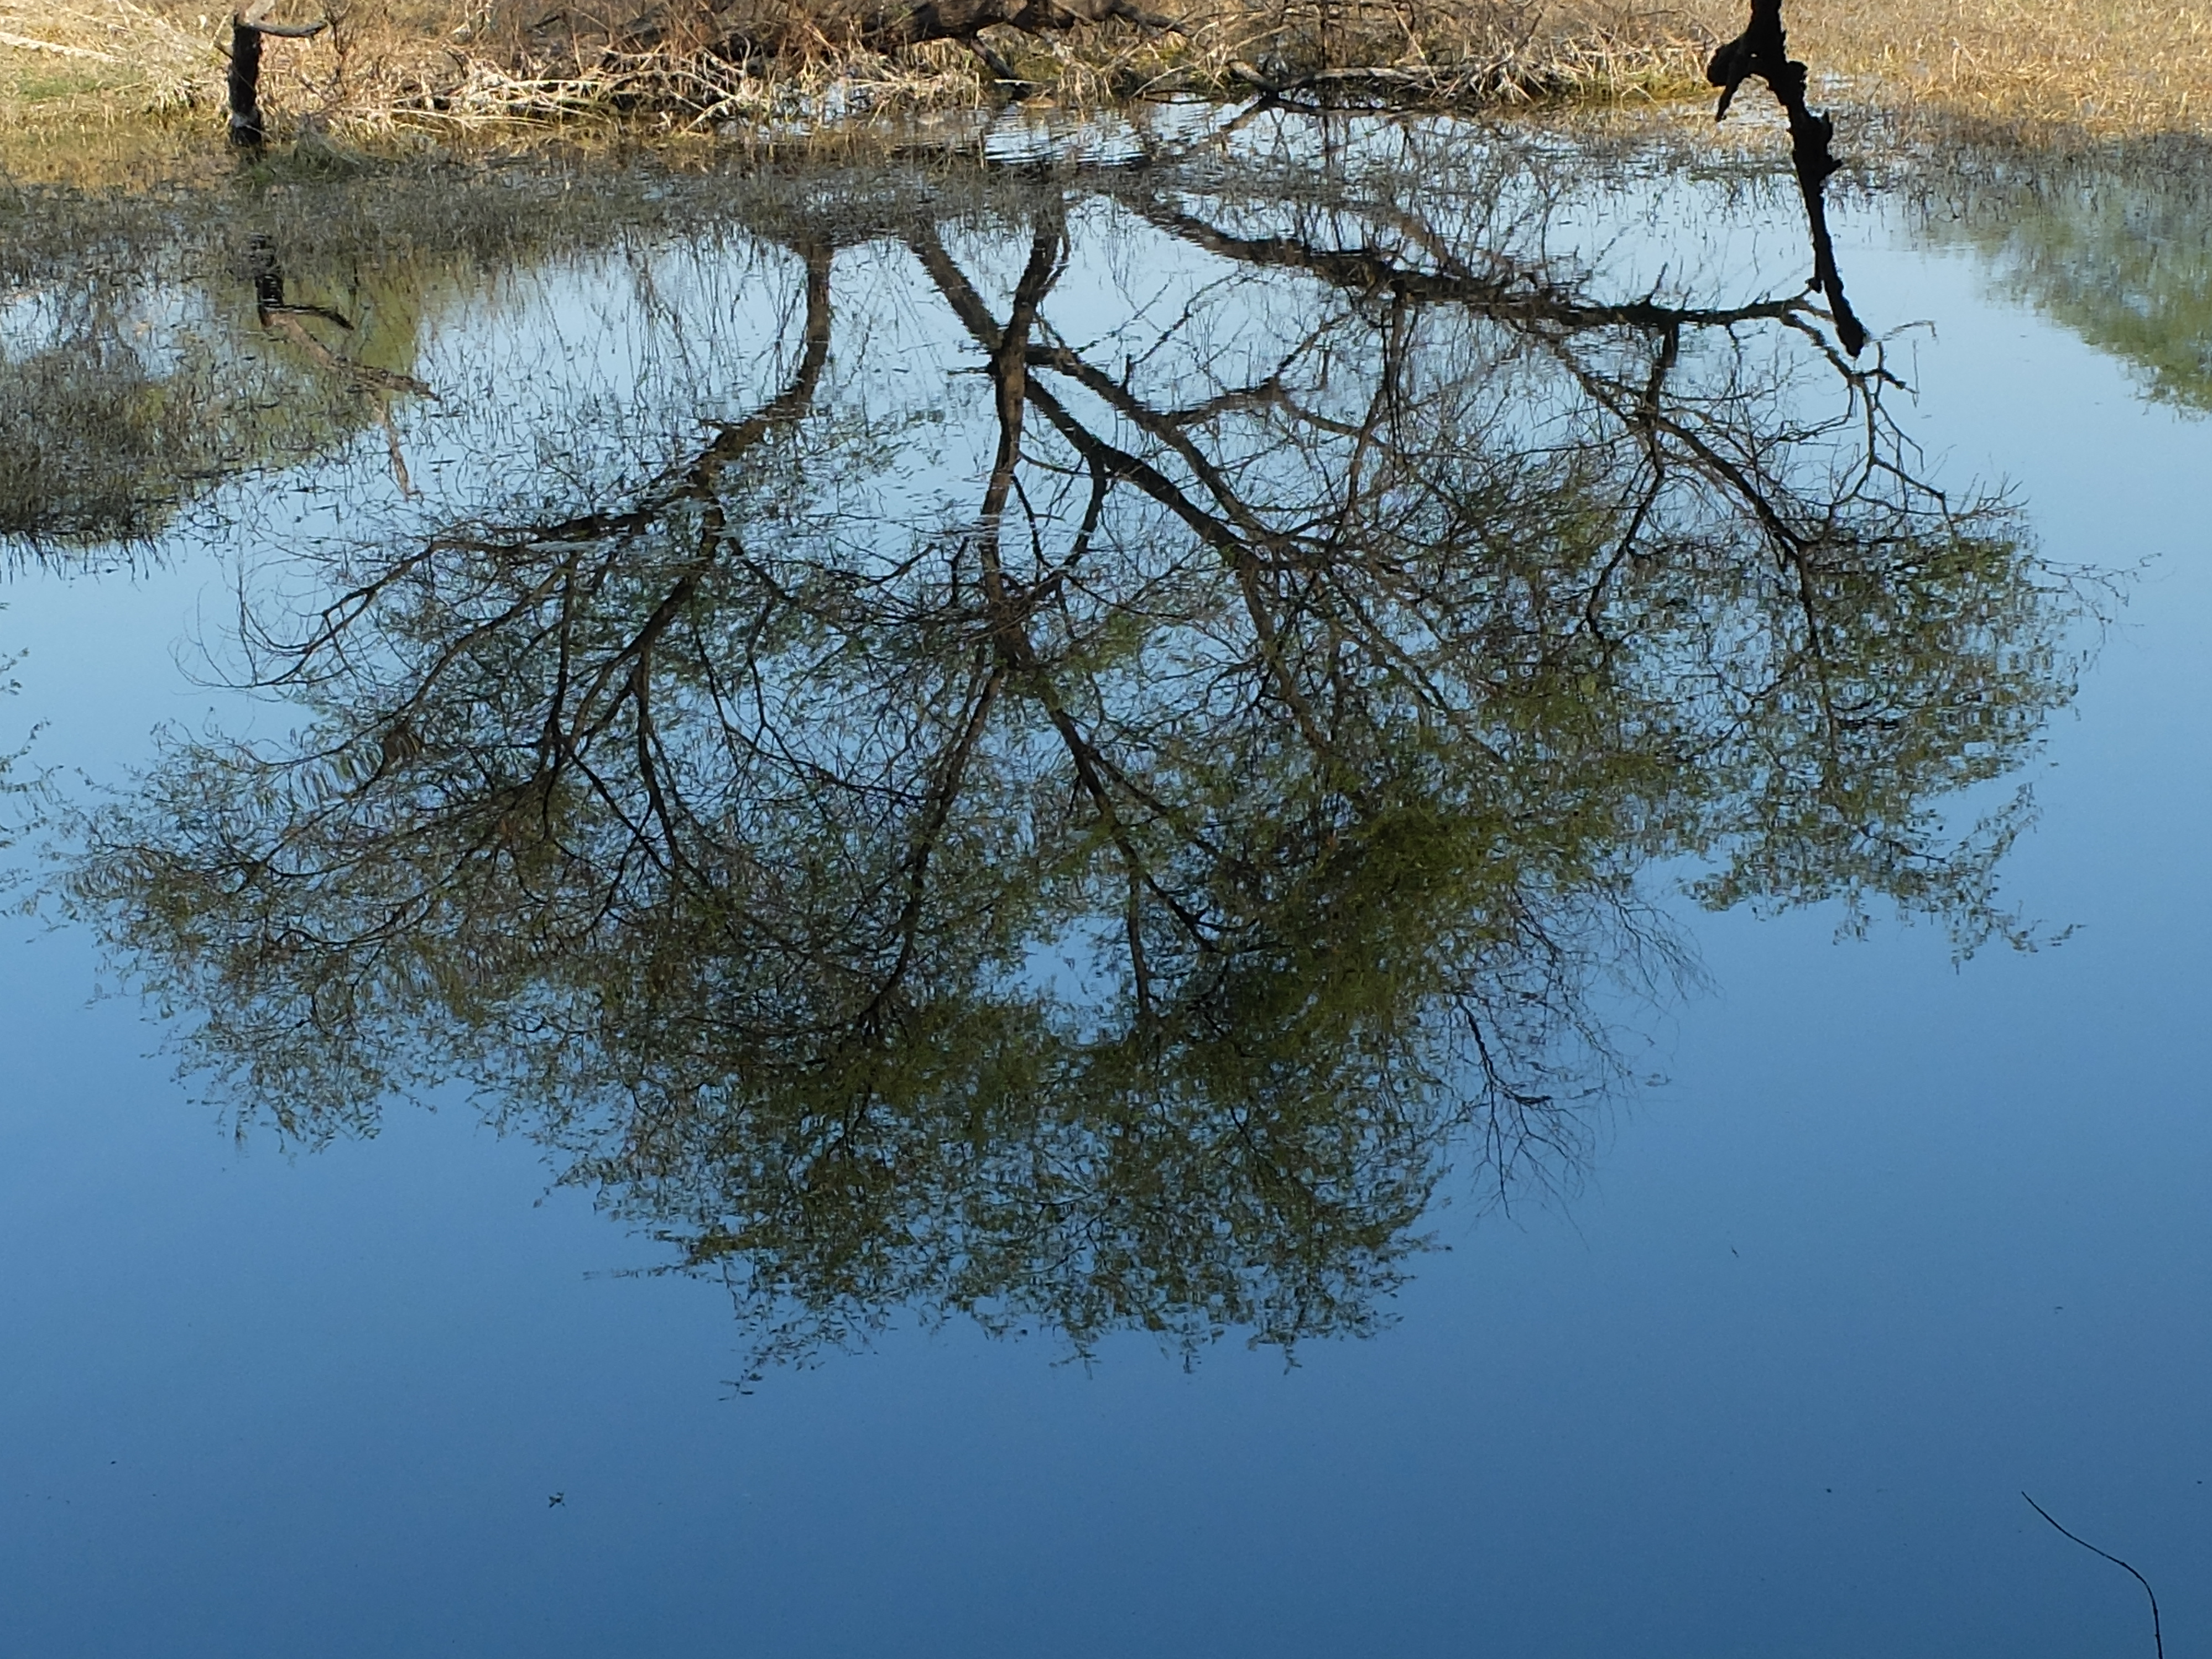 File:Reflection of tree in water.jpg - Wikimedia Commons